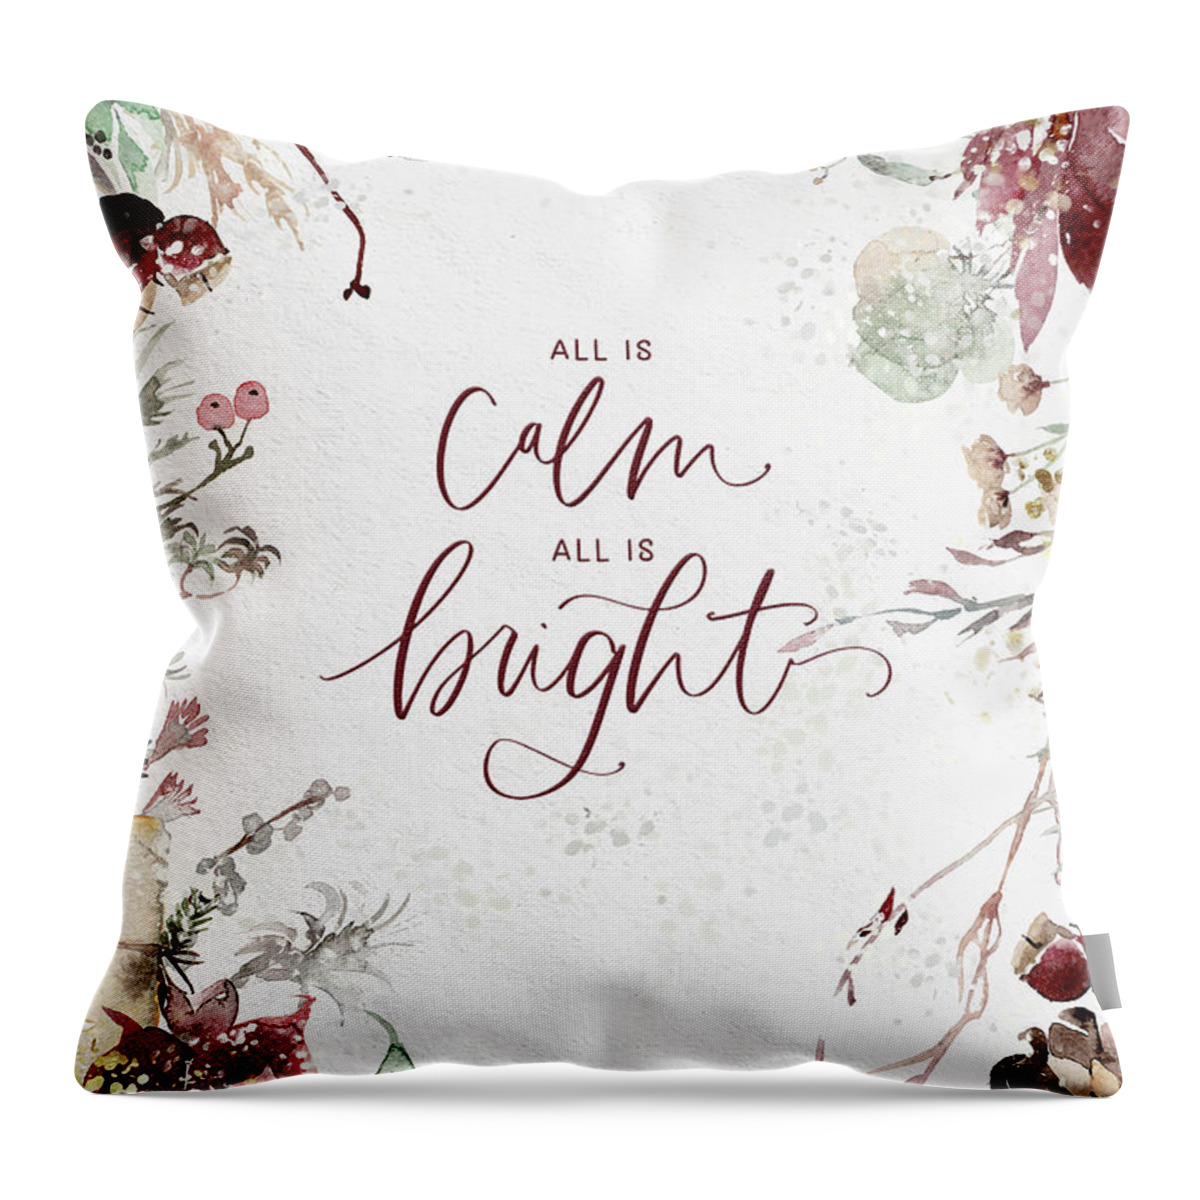 All Is Calm Throw Pillow featuring the painting All Is Calm by Jordan Blackstone